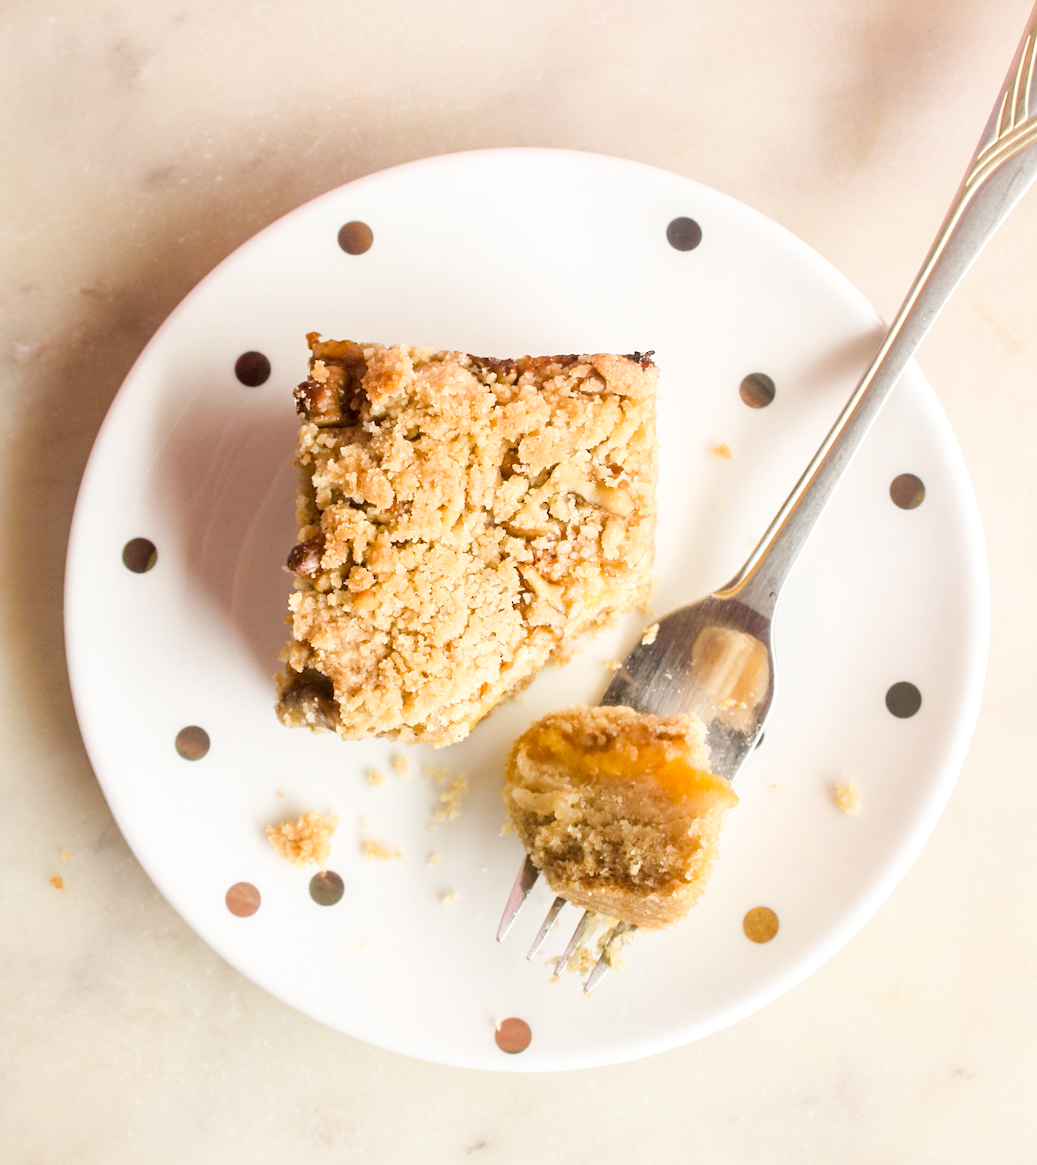 Buttery, soft shortbread bars with peach filling and crumble topping